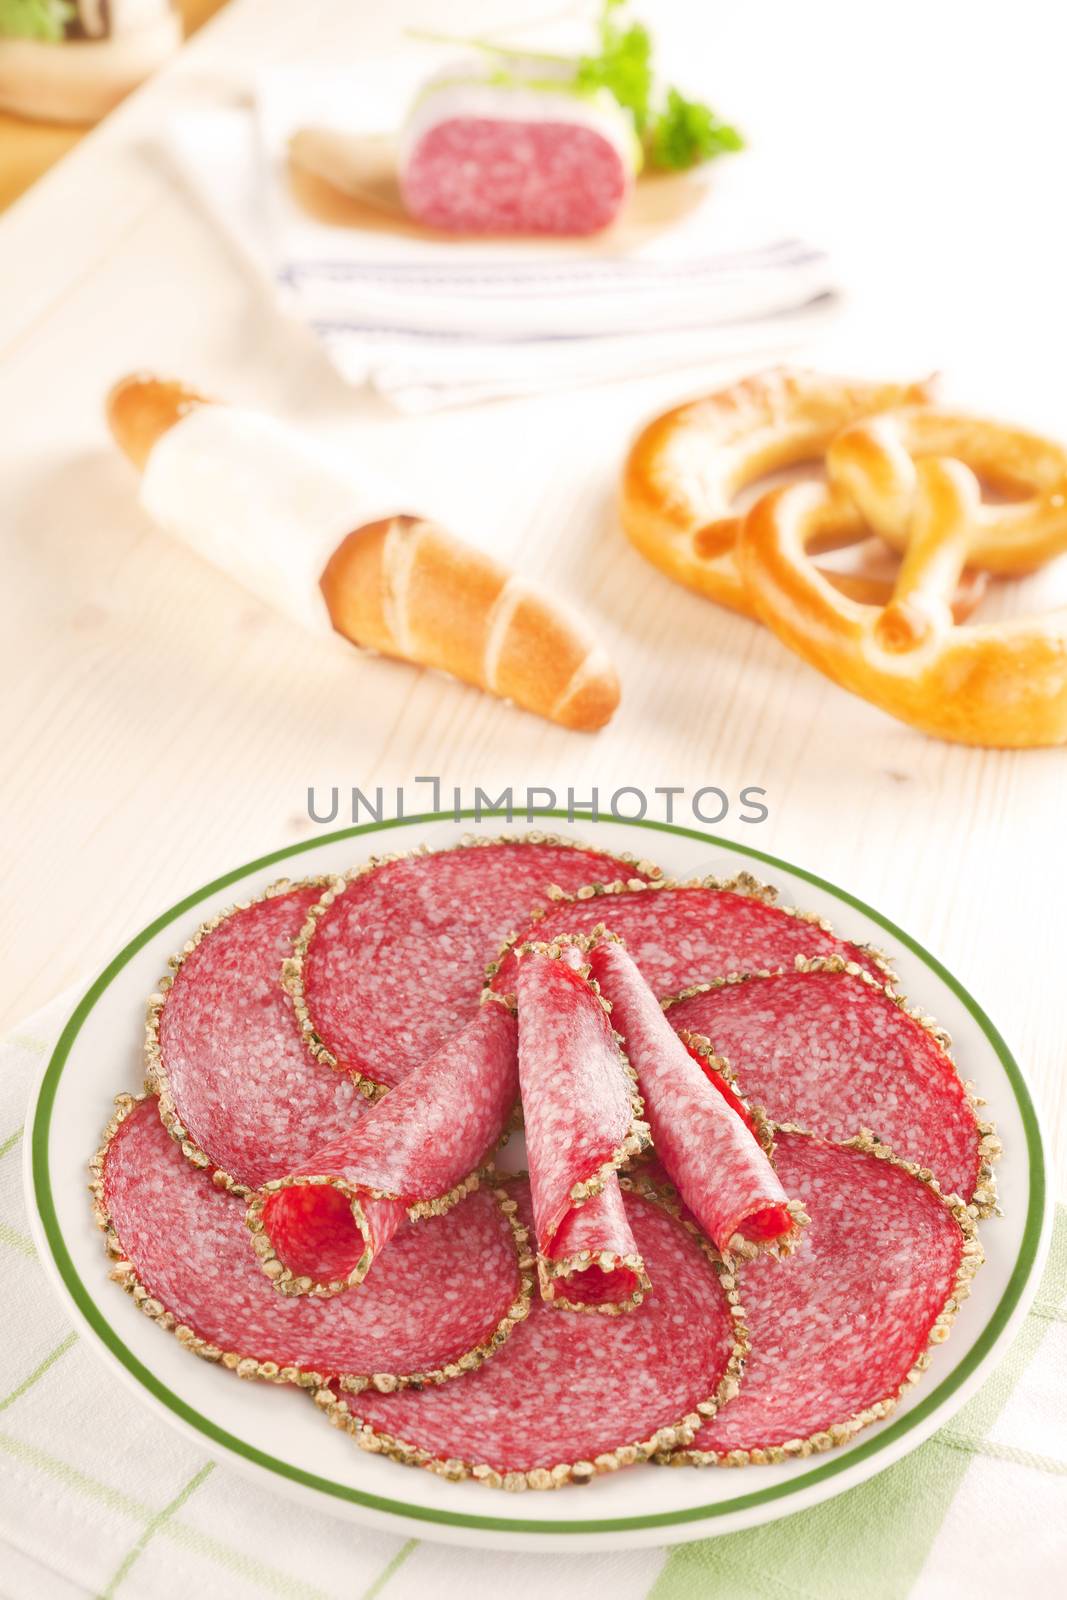 Delicious salami slices on plate with pastry, salami piece and fresh herbs in background. Culinary meat concept.